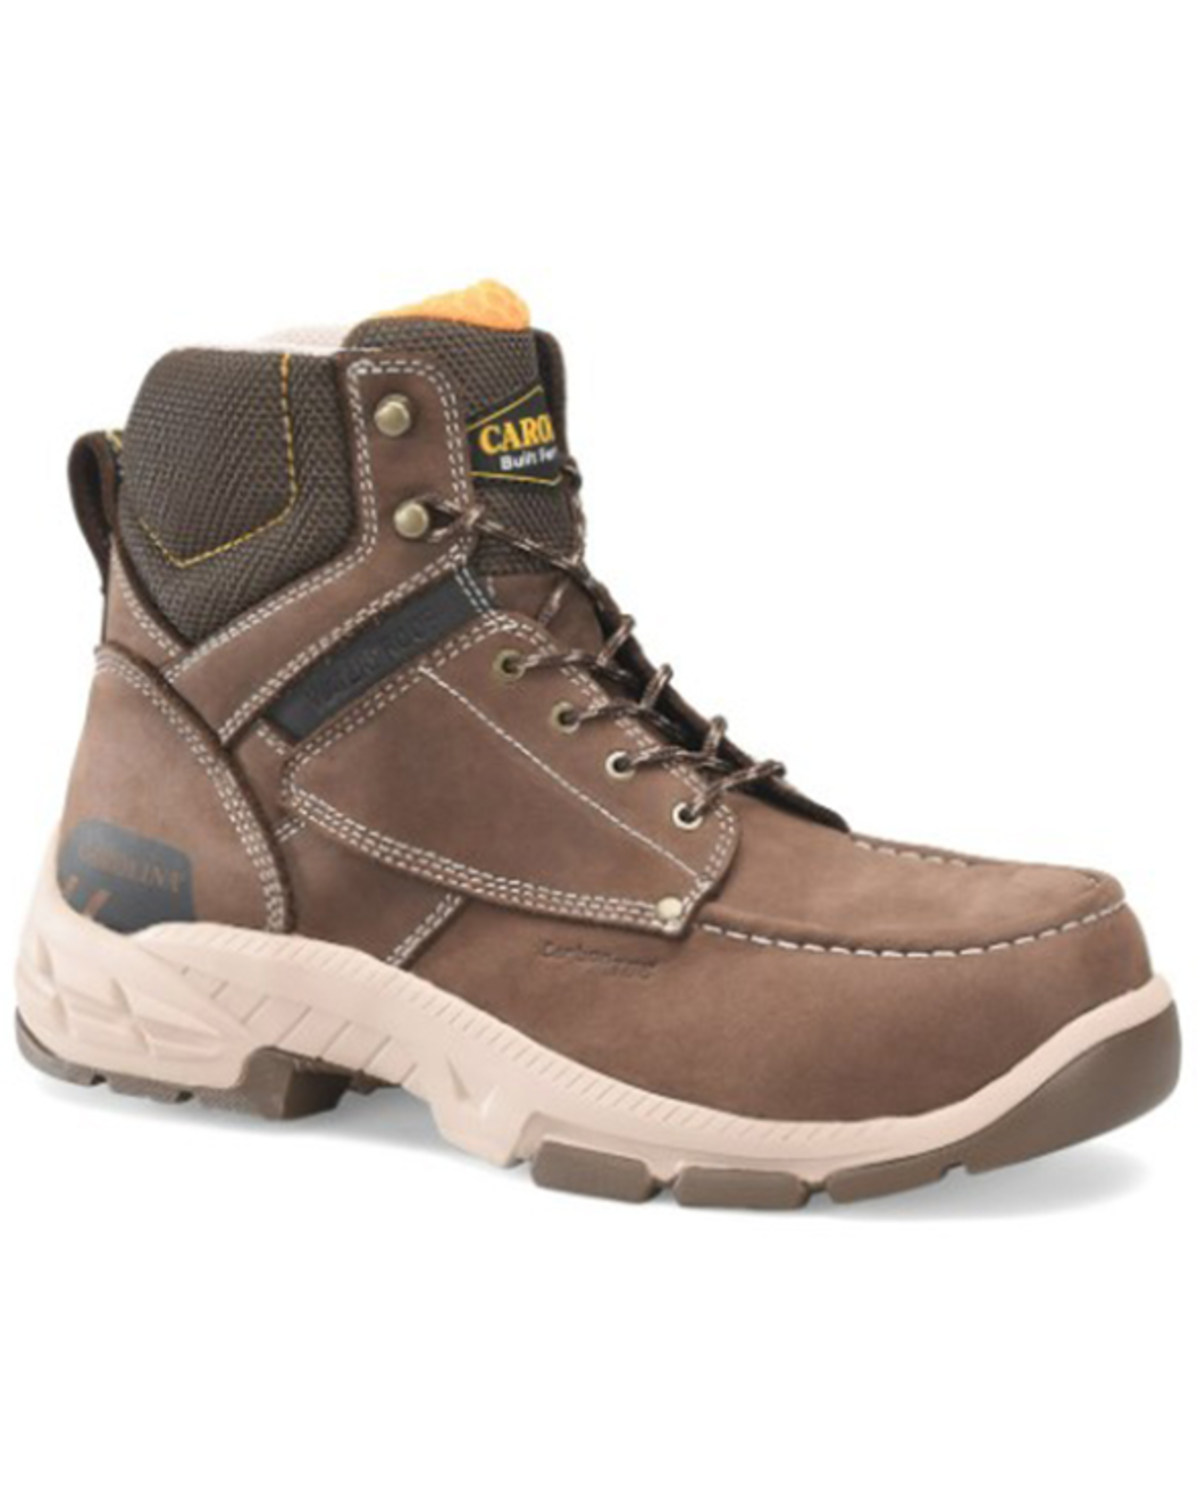 Carolina Men's Carbon 6" Lace-Up Waterproof Safety Work Boots - Composite Toe